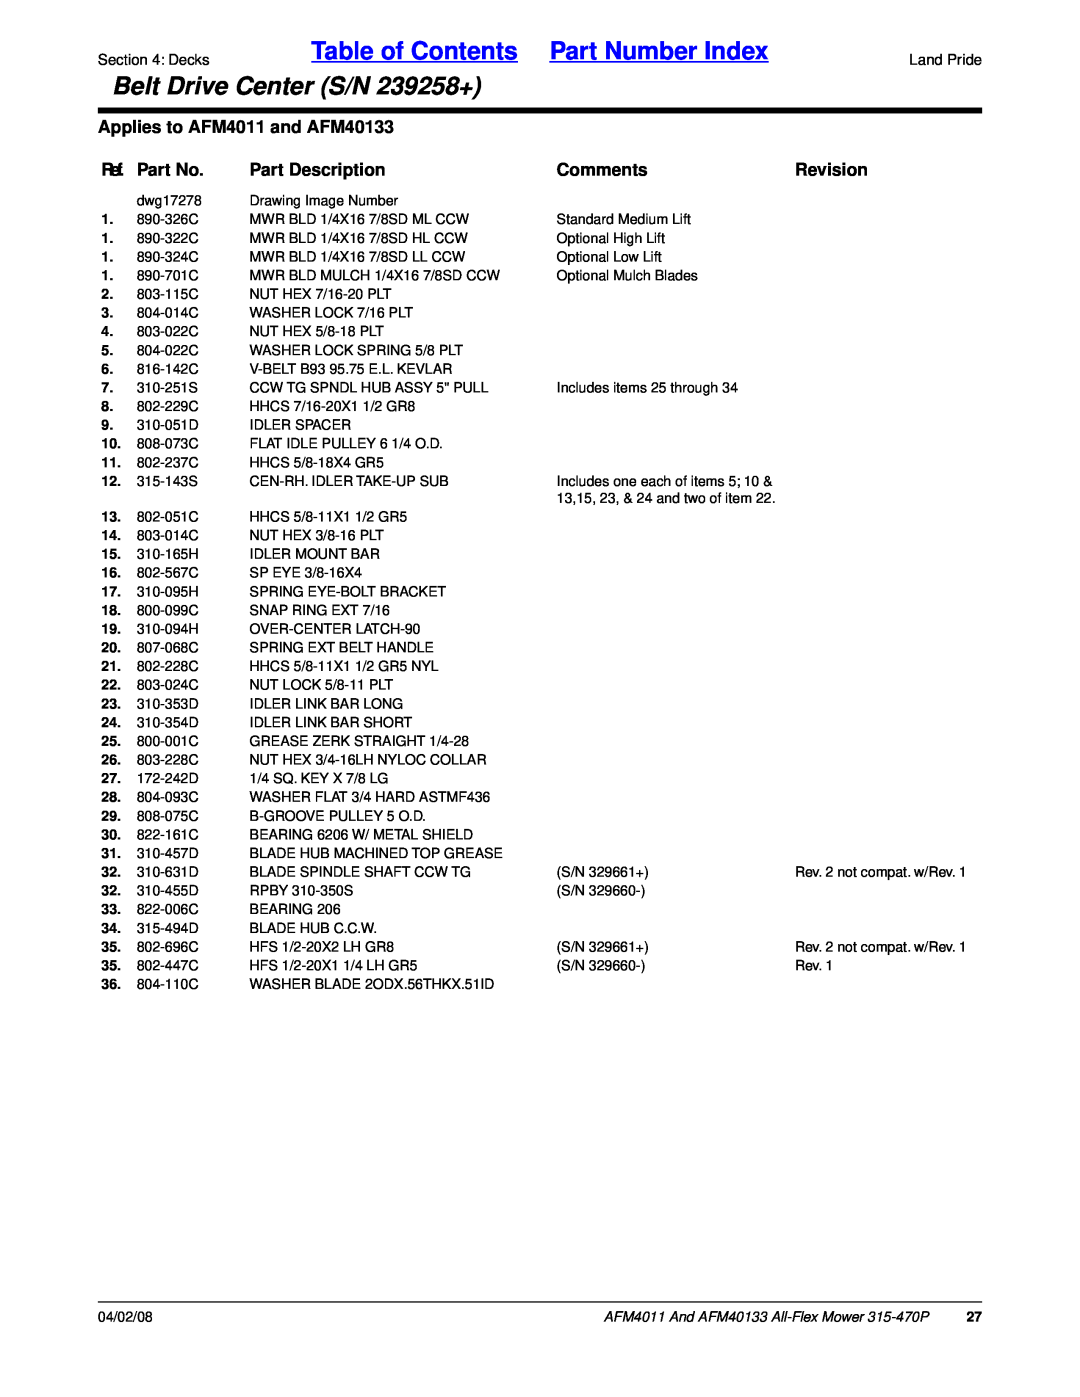 Land Pride manual Table of Contents Part Number Index, Belt Drive Center S/N 239258+, Applies to AFM4011 and AFM40133 